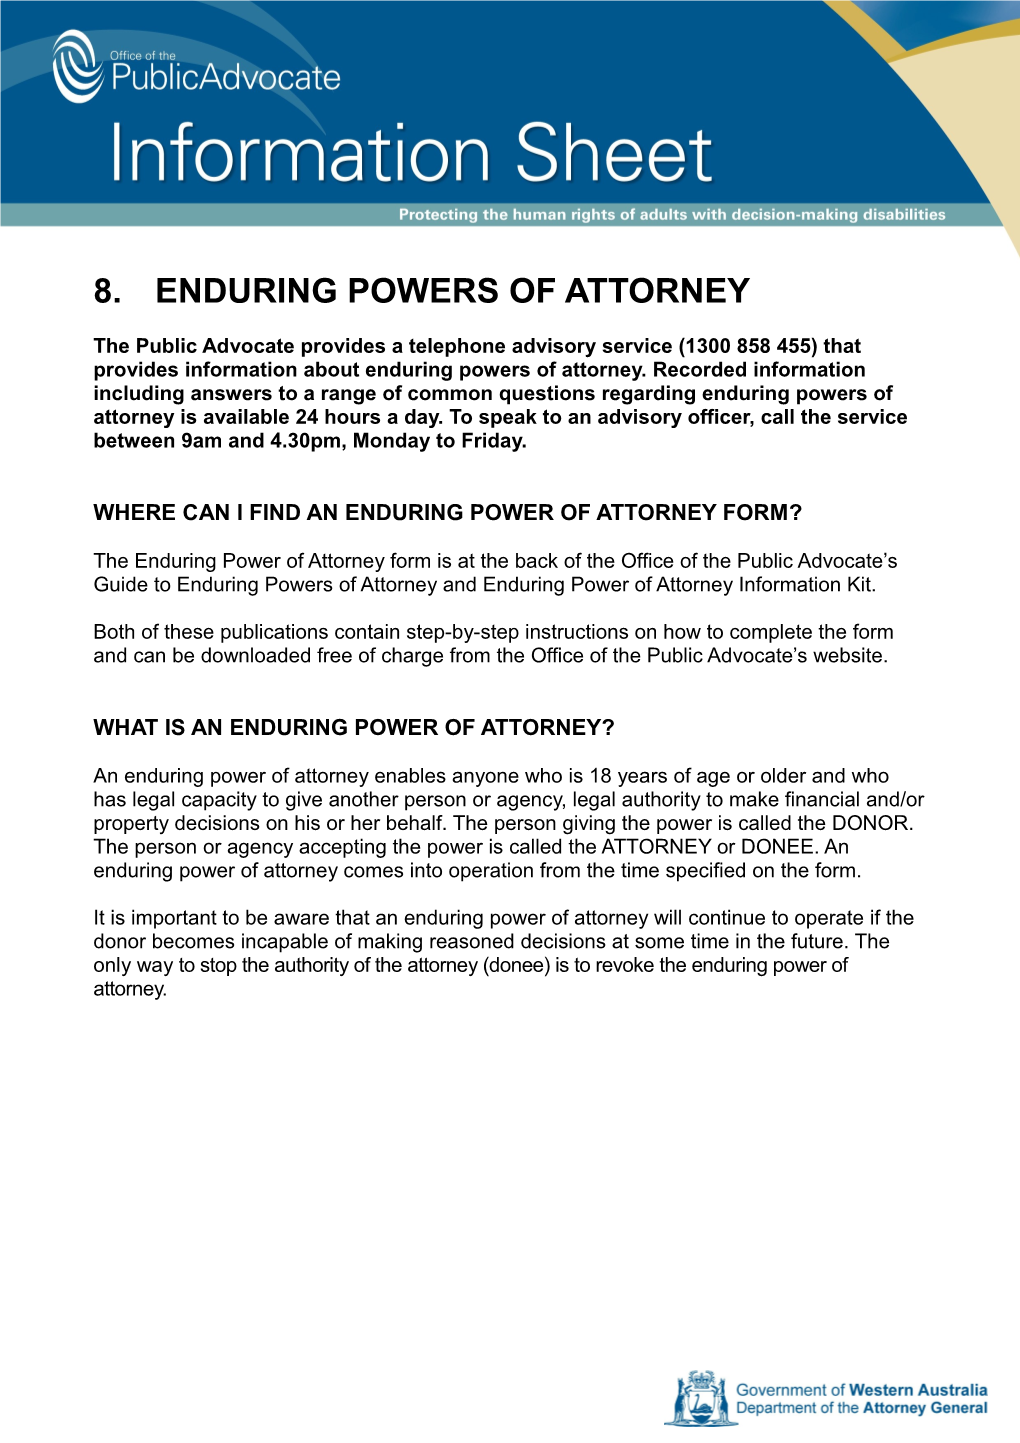 Where Can I Findan Enduring Power of Attorney FORM?